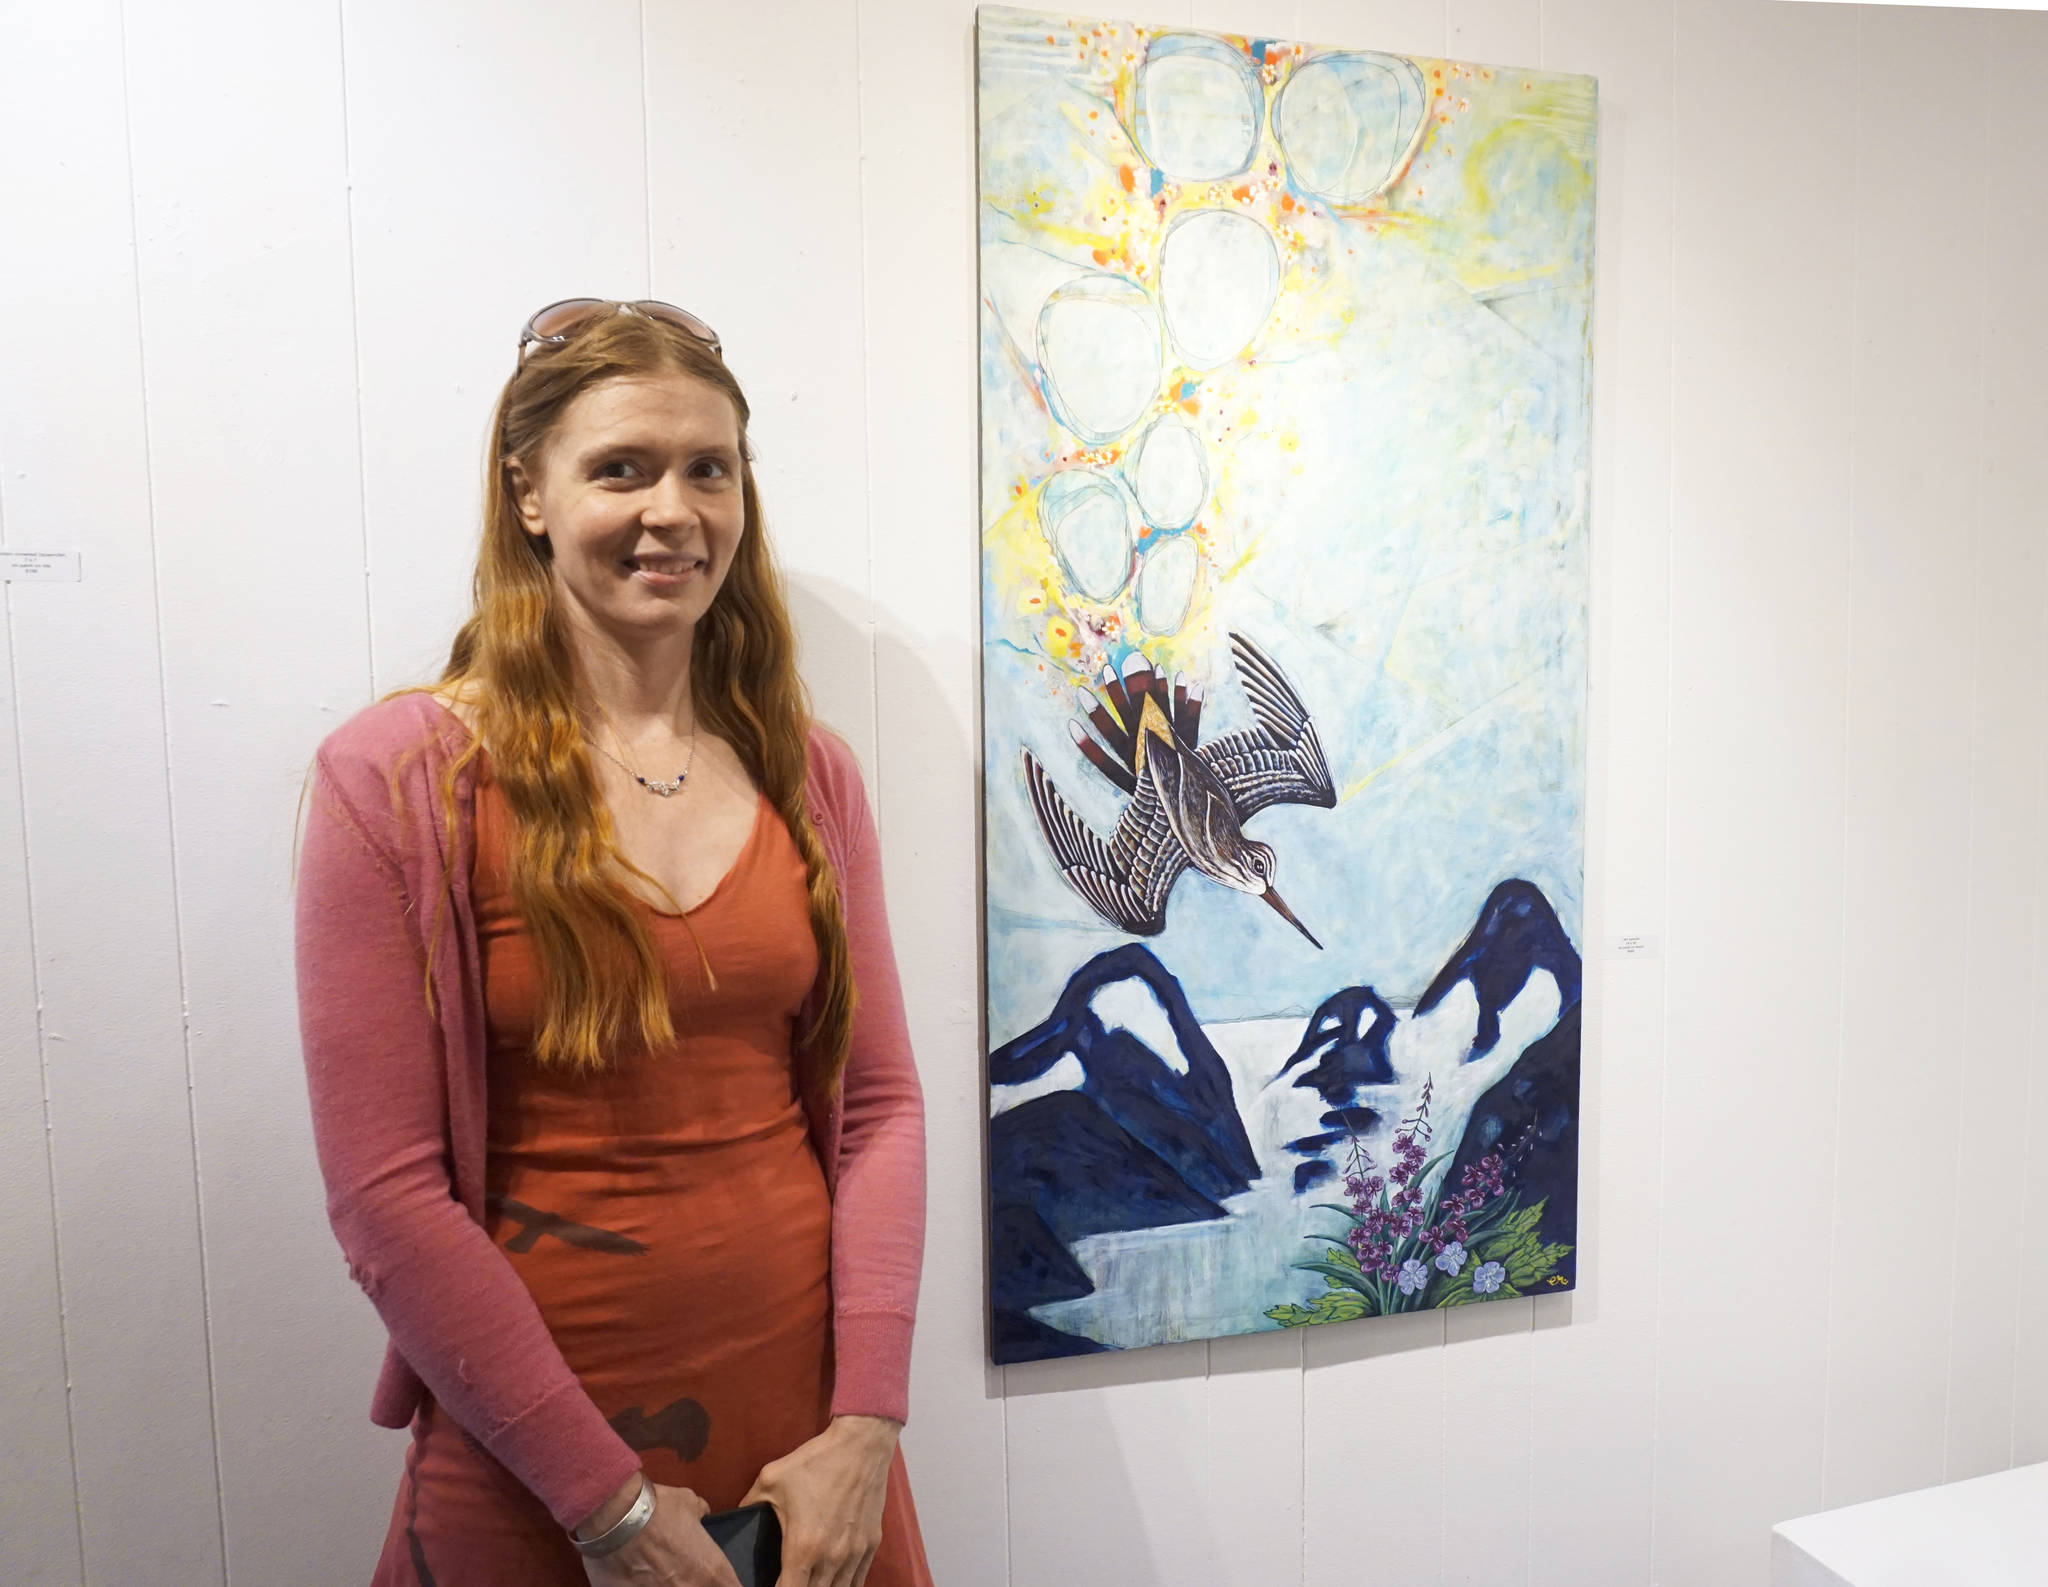 Erin Rae D’Eimon stands by one of her paintings at the First Friday opening for her show on May 4, 2018 at the Homer Council on the Arts in Homer, Alaska. (Photo by Michael Armstrong/Homer News)